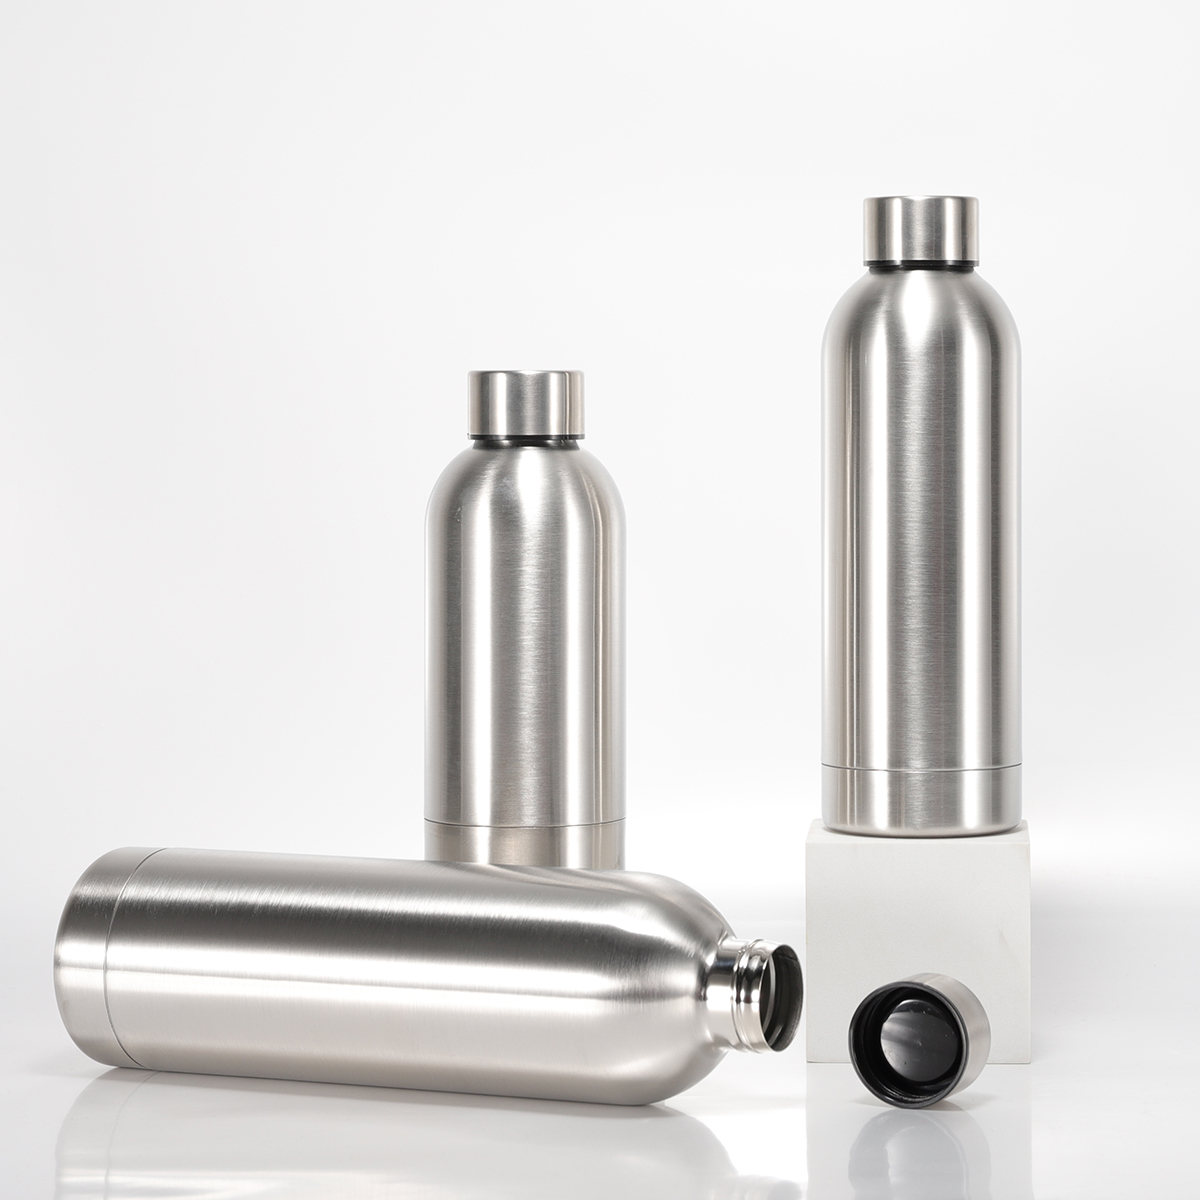 Stylish and Durable: Our 316 Stainless Steel Insulated Drinkware Collection